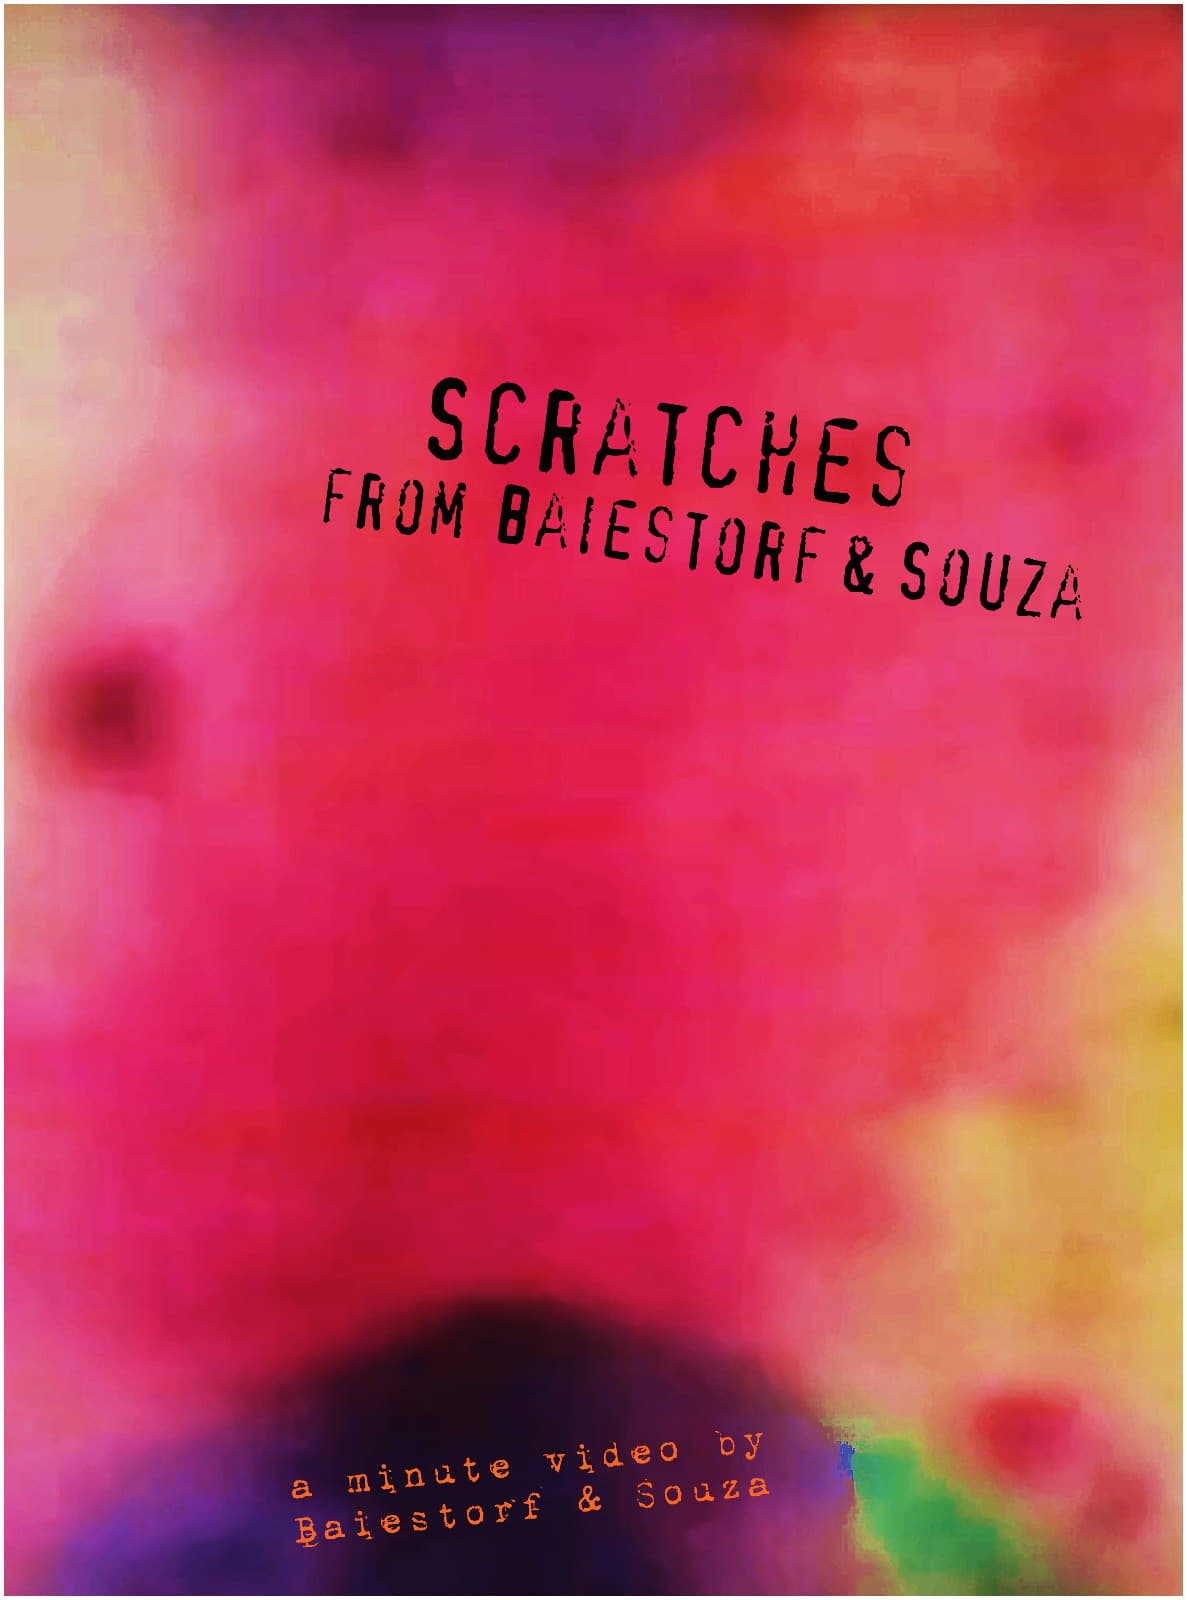 Scratches from Baiestorf & Souza